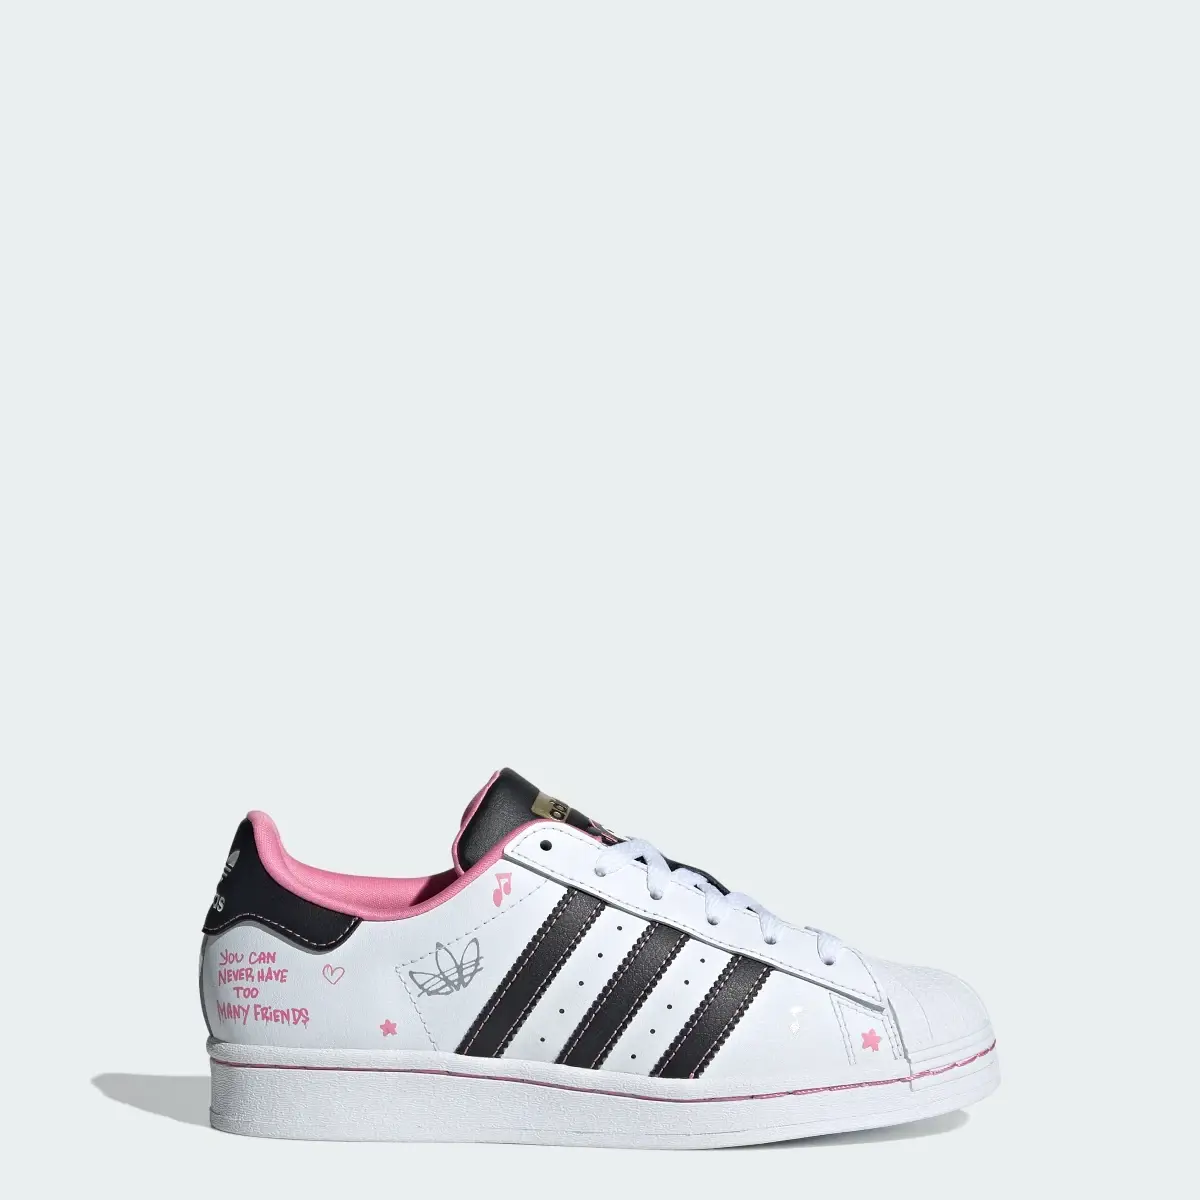 Adidas Originals x Hello Kitty and Friends Superstar Shoes Kids. 1